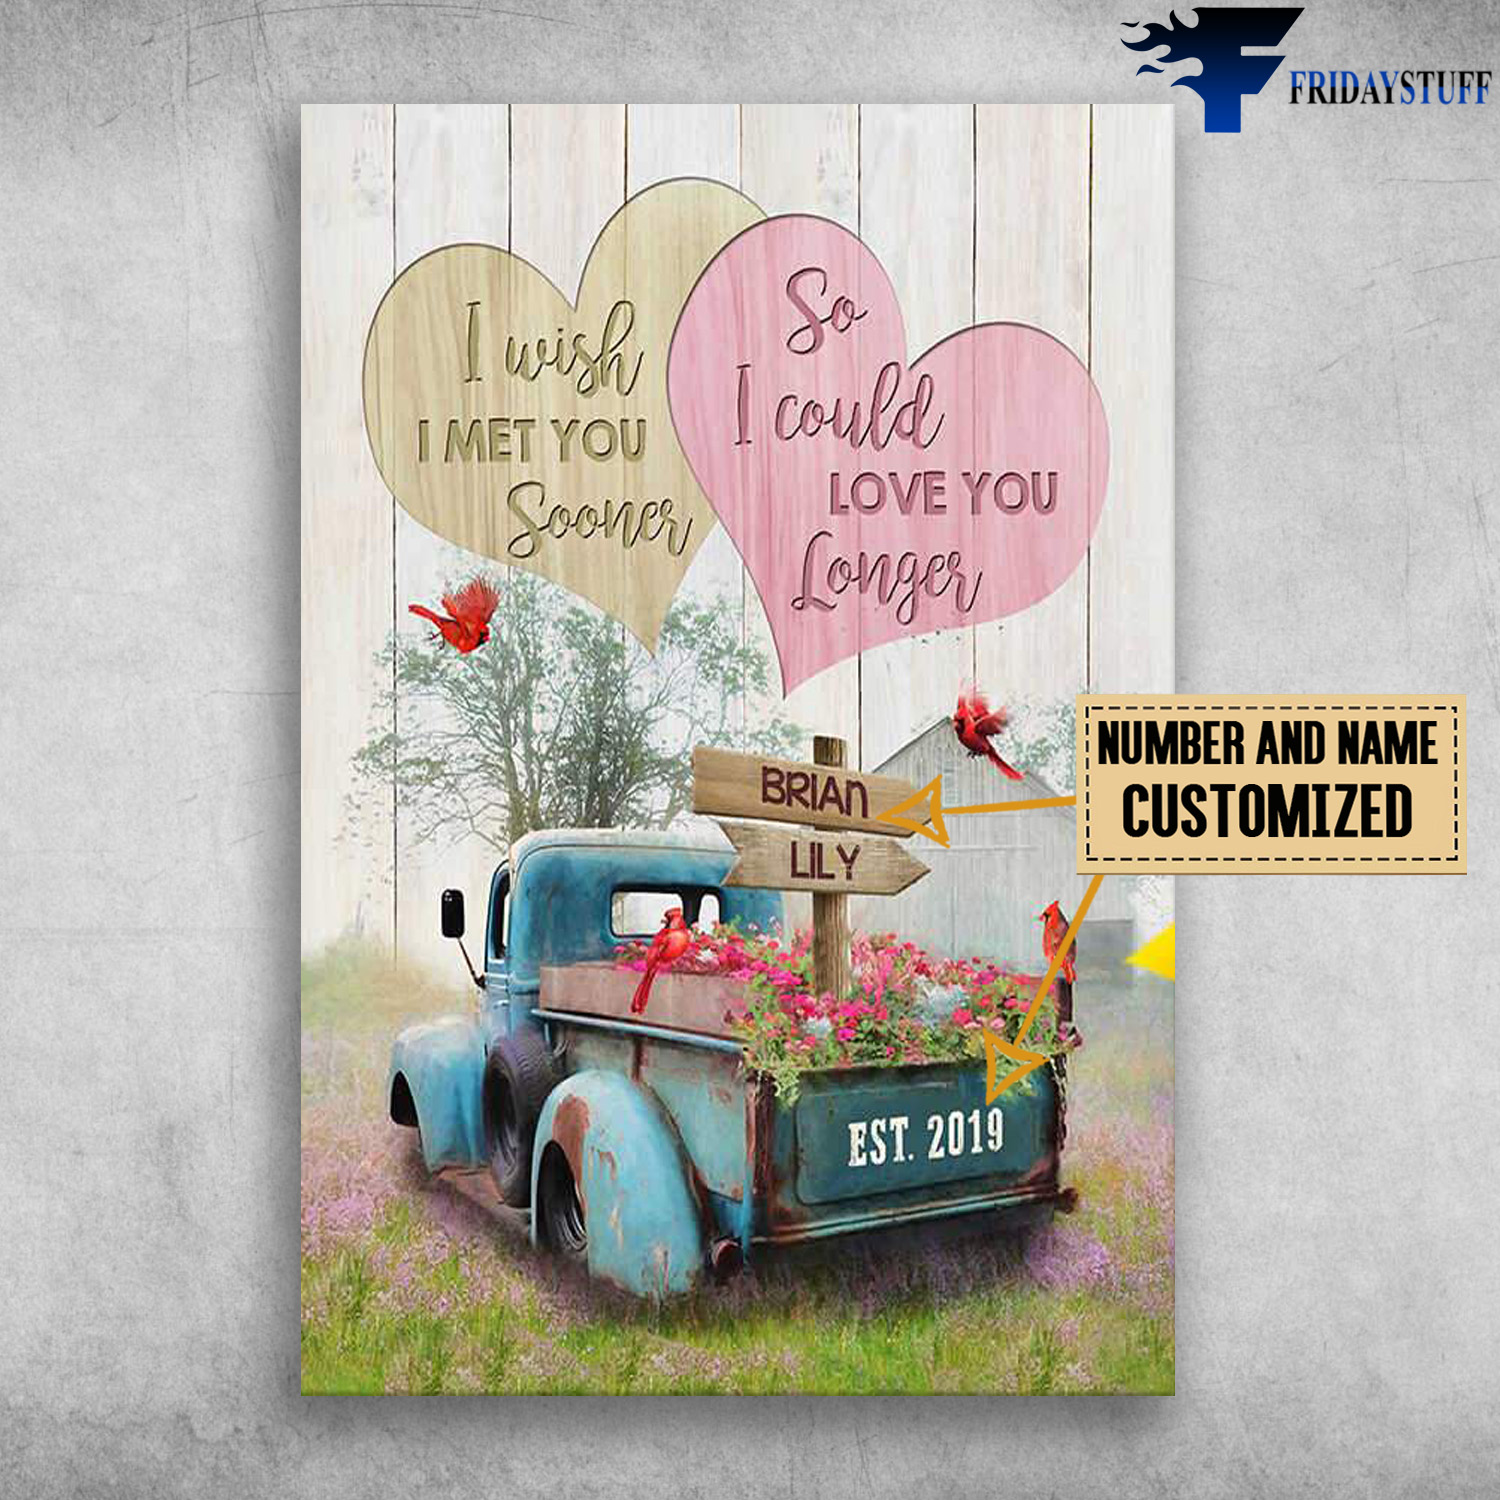 Truck And Cardinal Bird, I Wish I Met You Sooner, So I Could Love You Longer